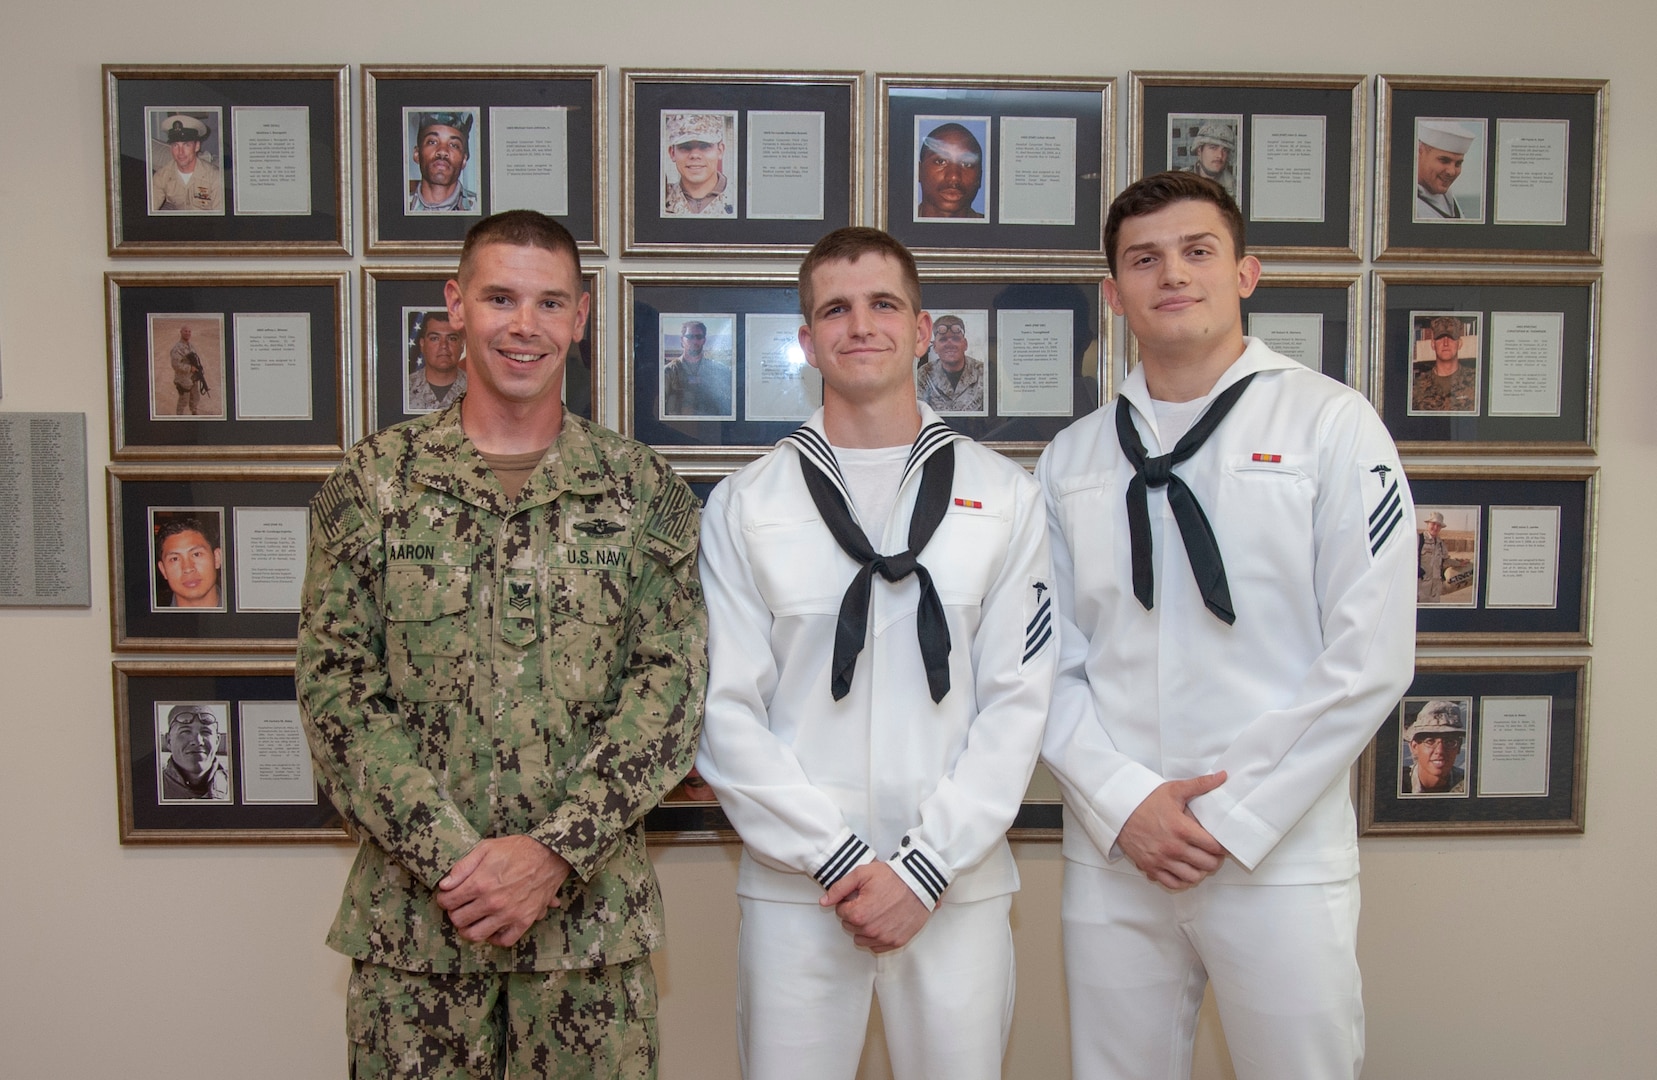 Seaman Nicholas Earls (left), Seaman 1st Class Michael Aaron (center), an instructor with the Hospital Corpsman Basic (HCB) program, and Seaman Enea Preci (right), pose for a photo at the Medical Education and Training Campus. The three Sailors acted as first responders, assisting a patient who collapsed at the Veterans Affairs Emergency Room Aug. 27.